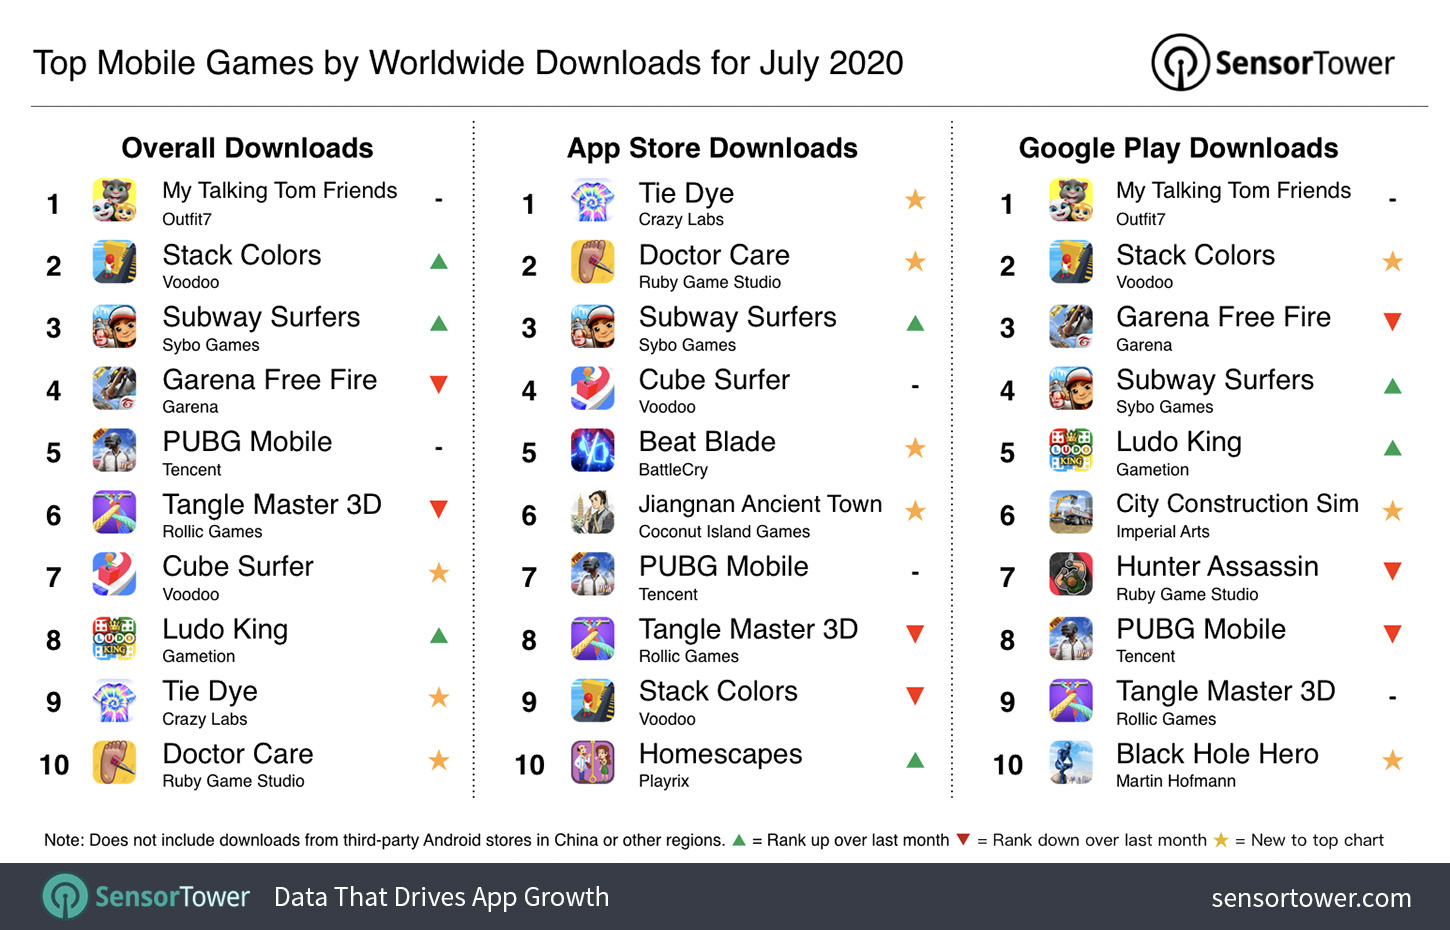 Top Mobile Games Worldwide for July 2020 by Downloads